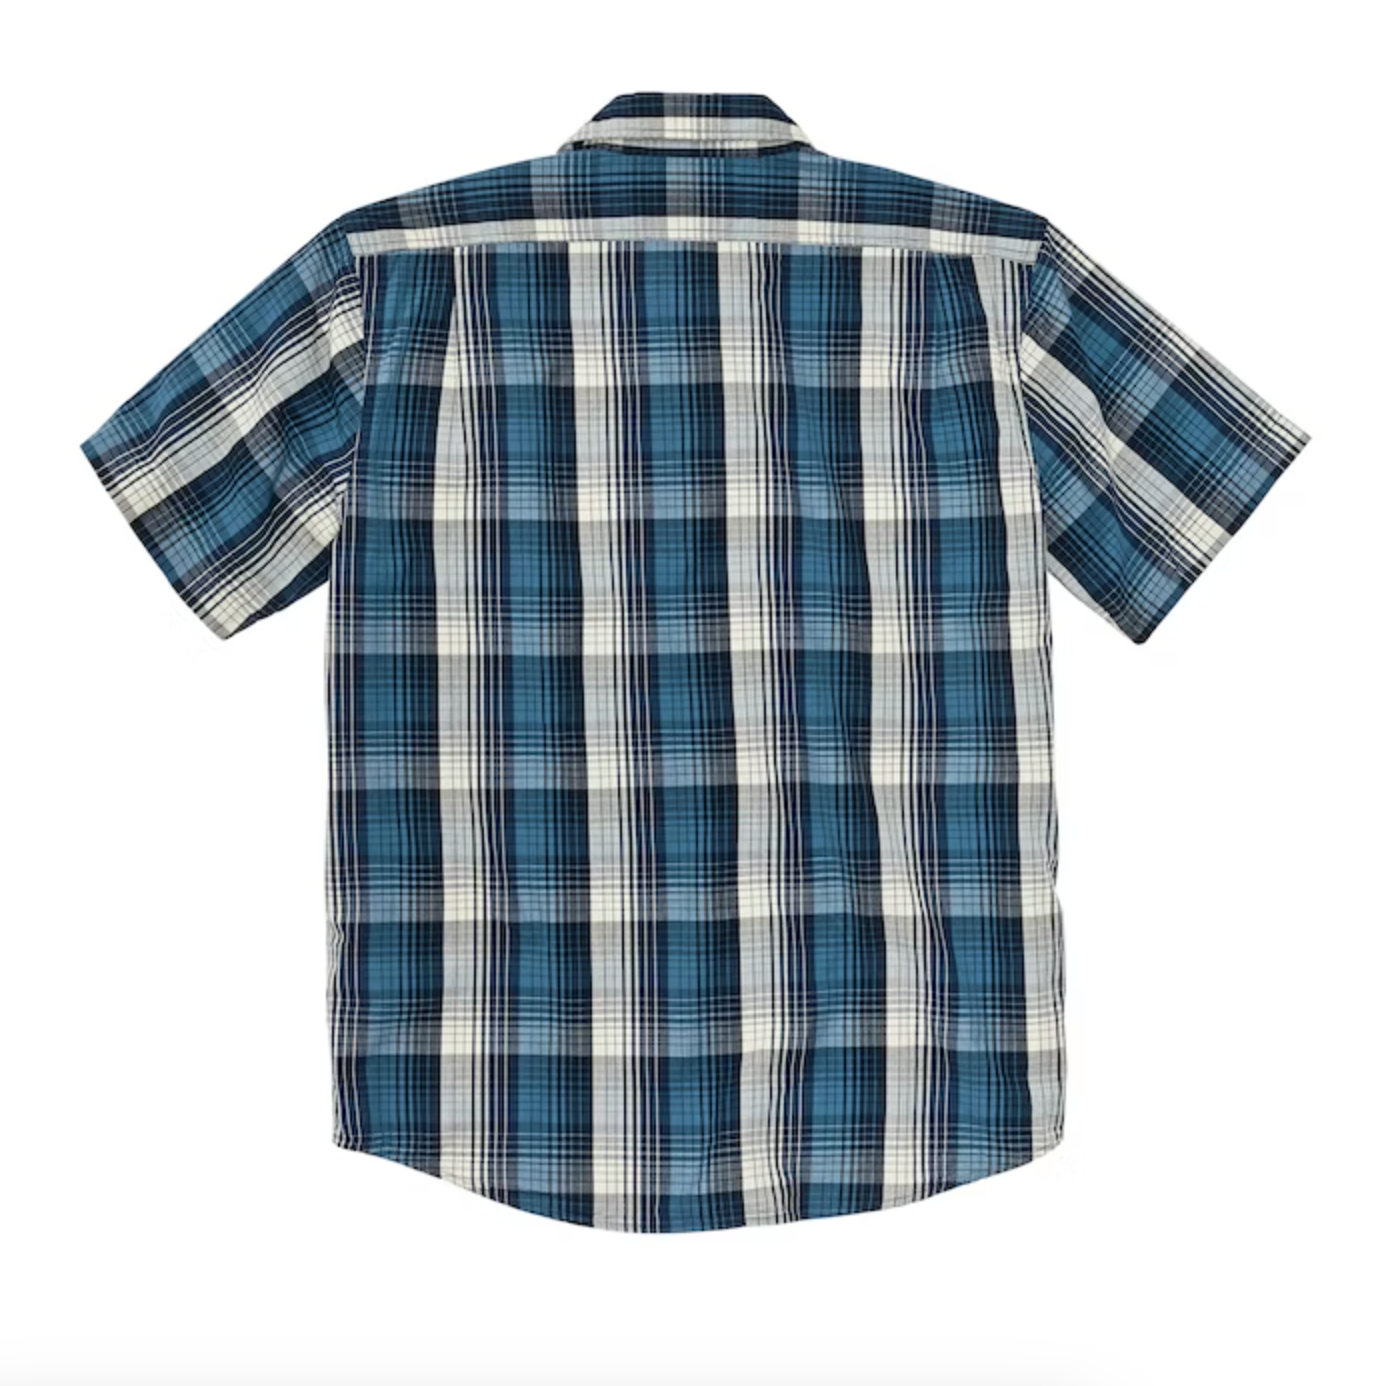 Washed SS Feather Cloth Shirt Srv Blue/Wht Plaid